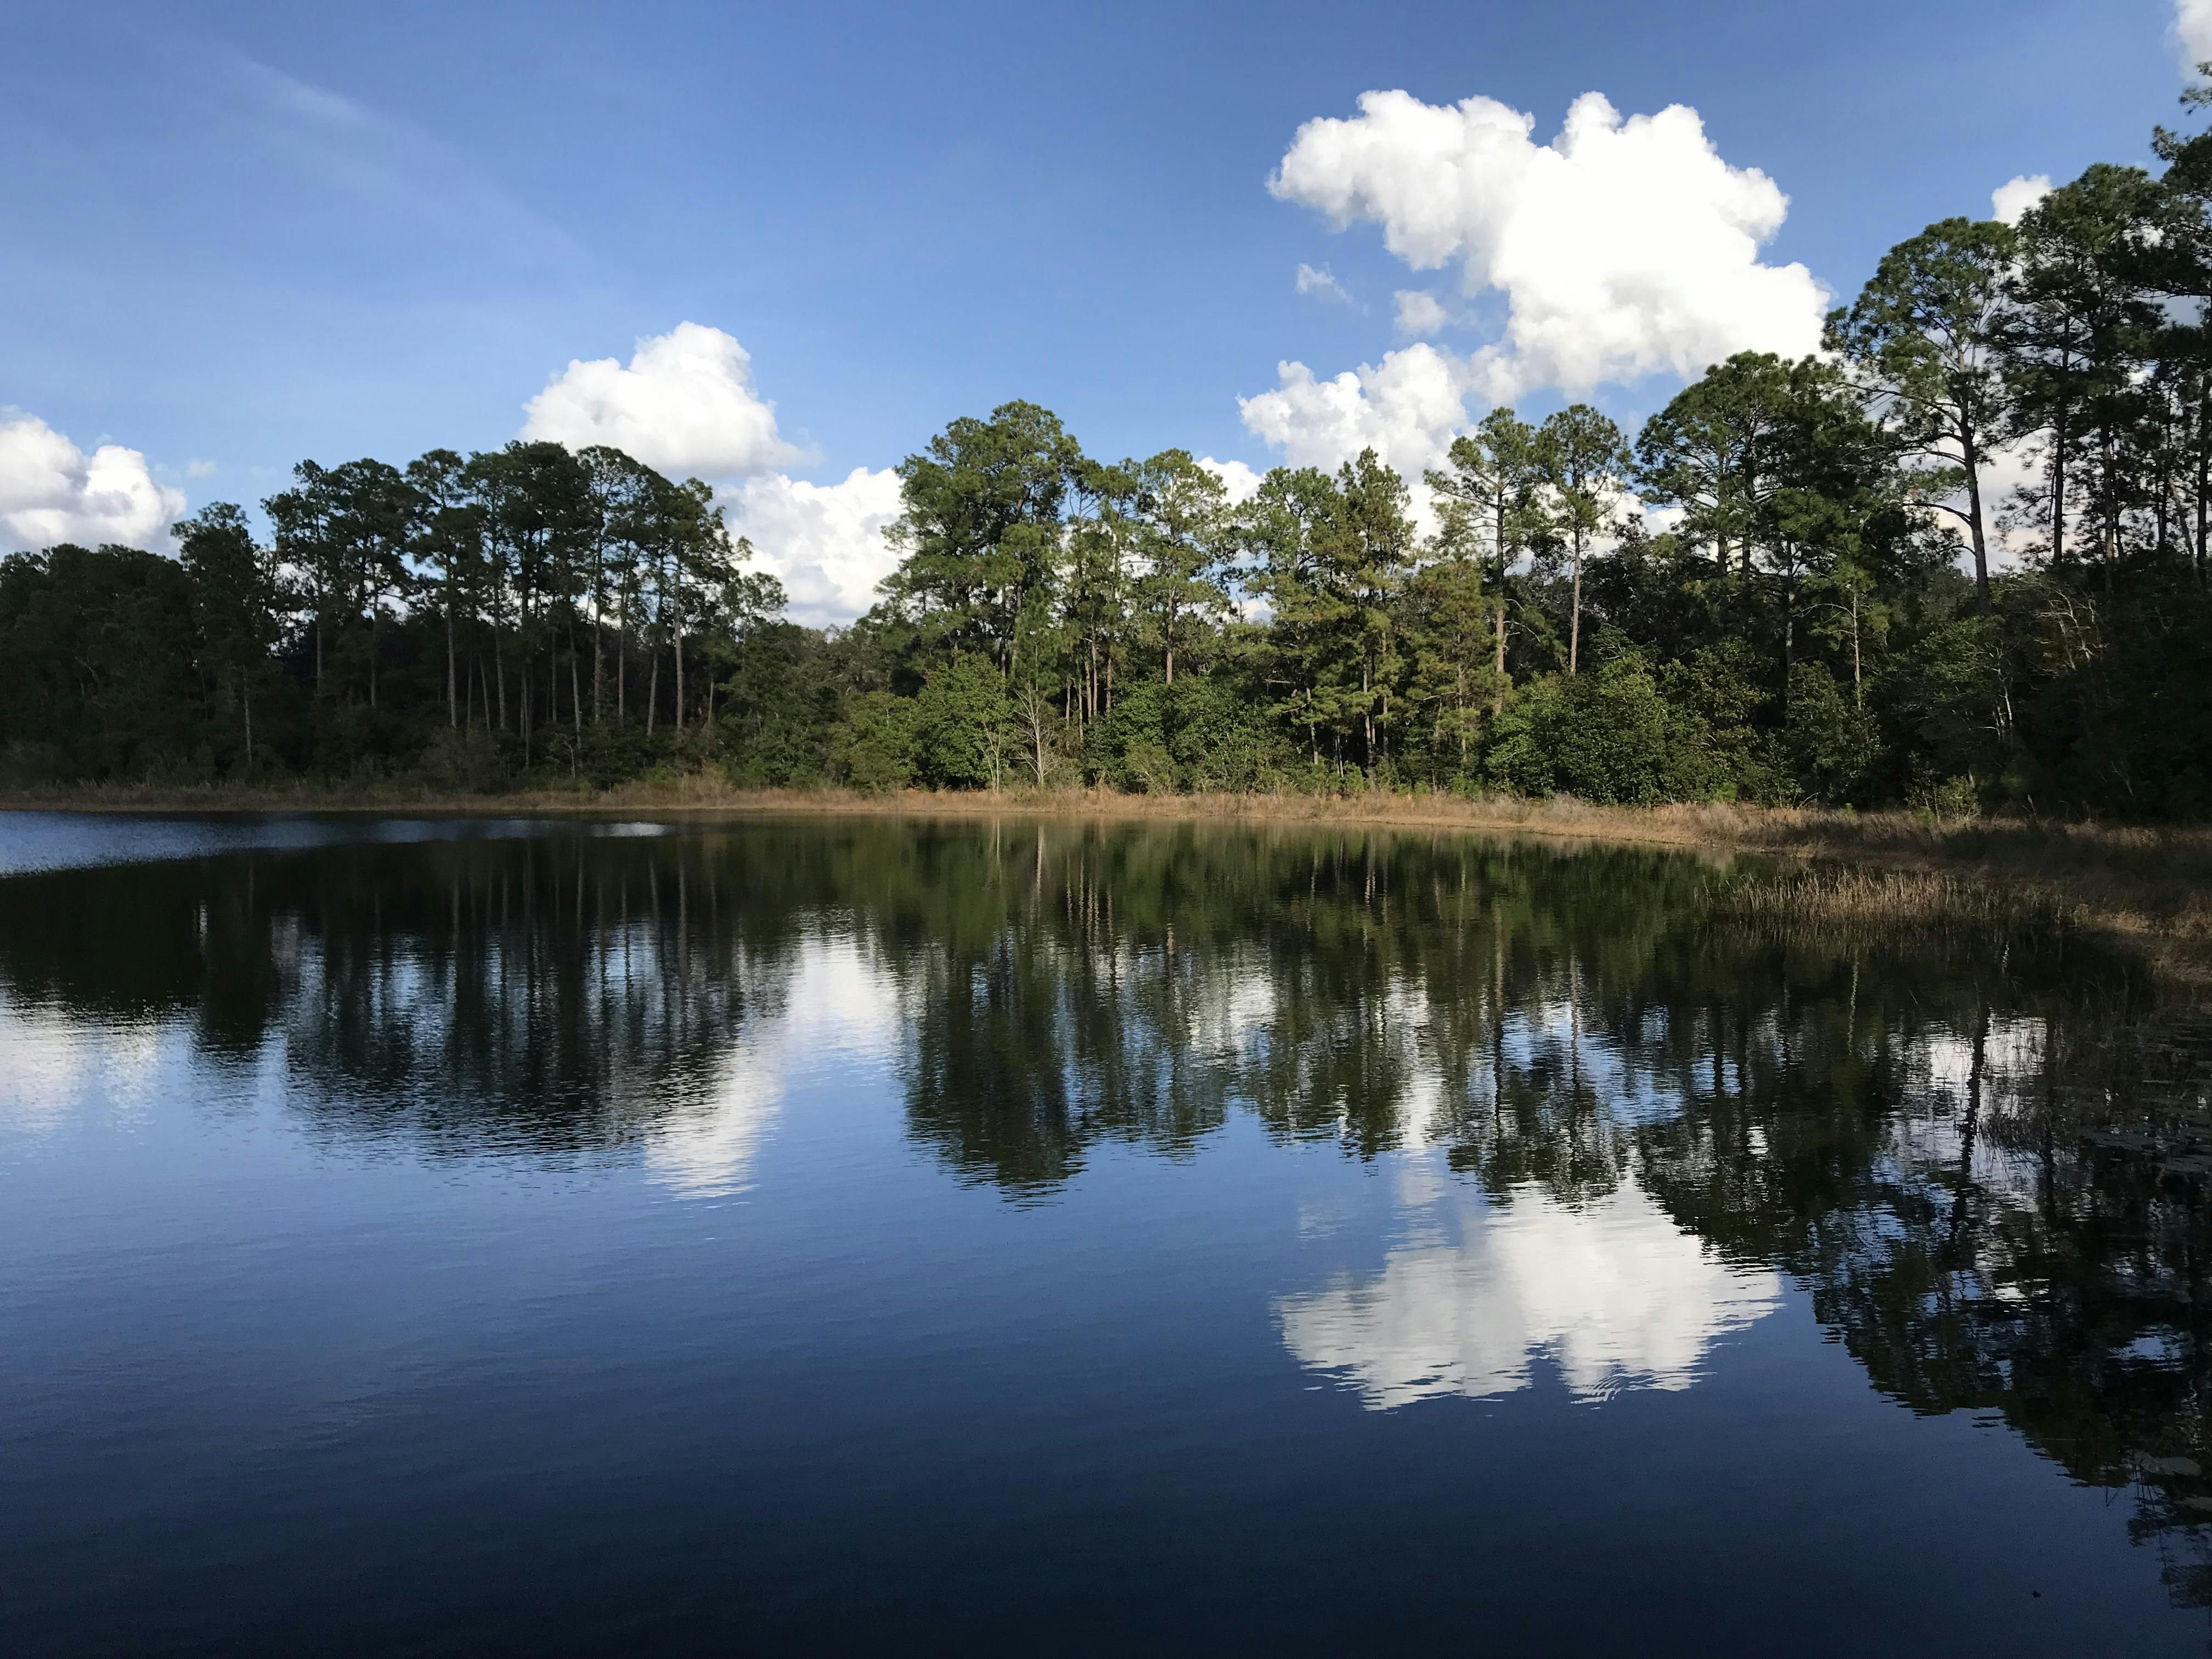 A lake in Ocala National Forest